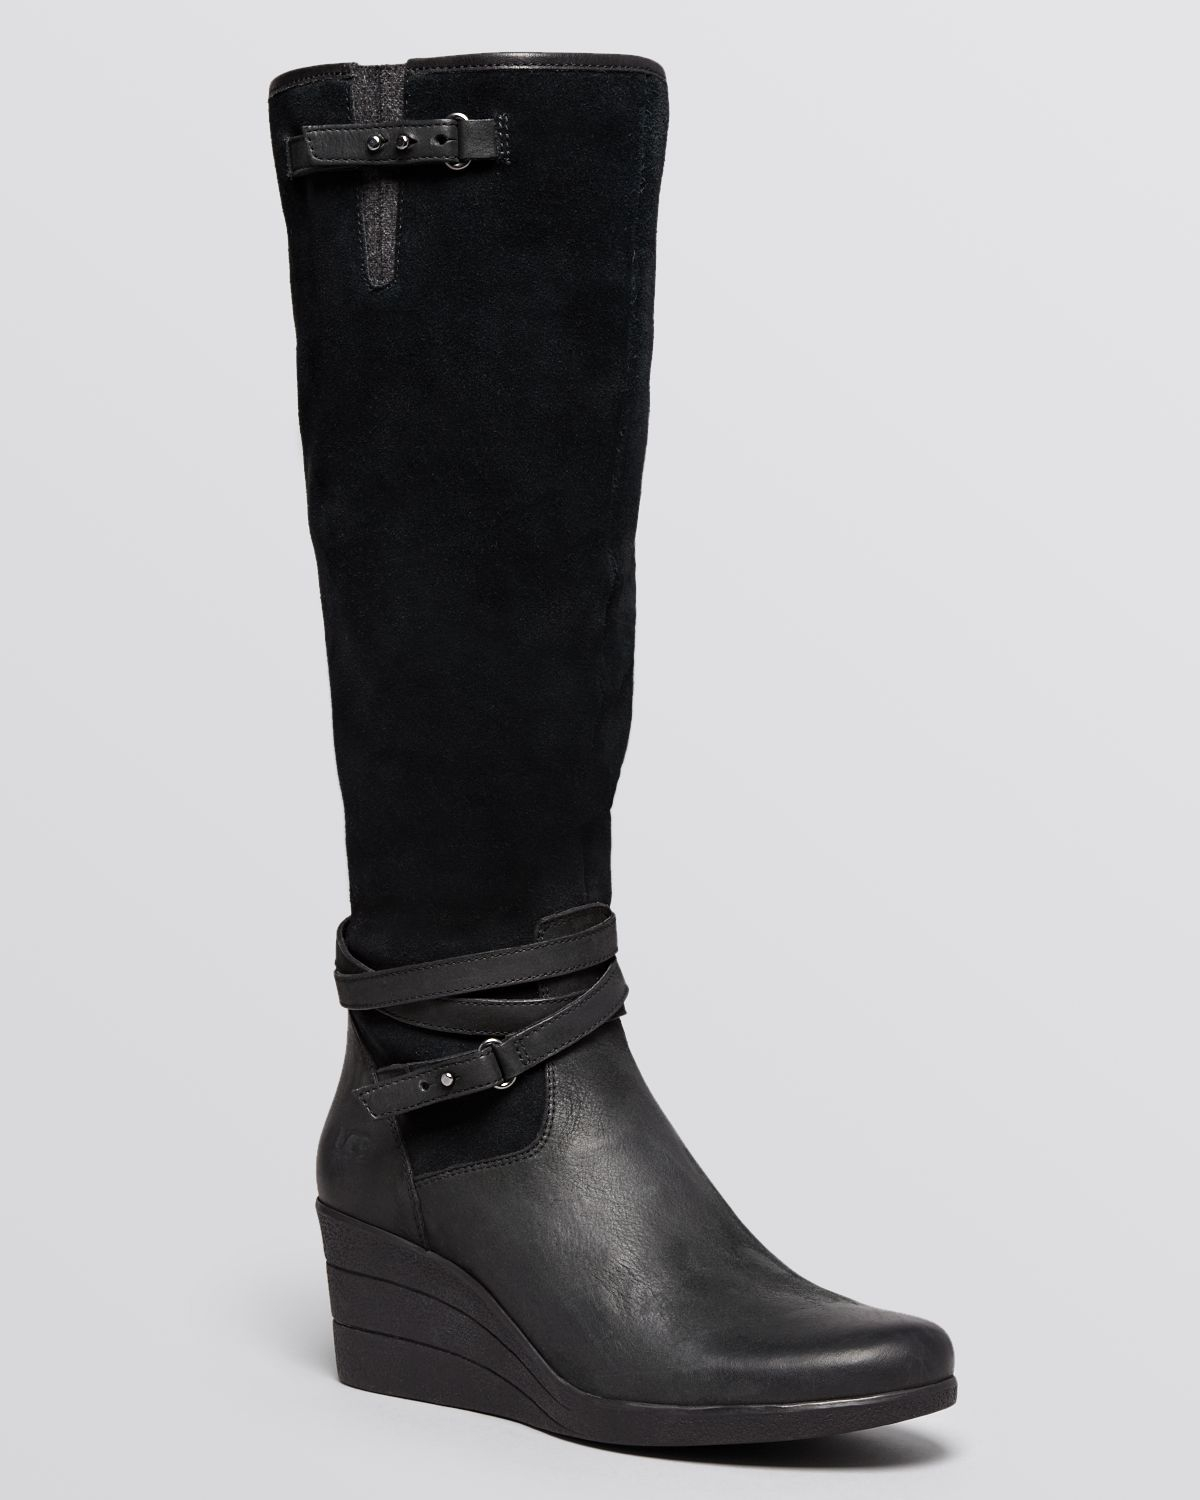 UGG Tall Wedge Boots - Lesley in Black | Lyst